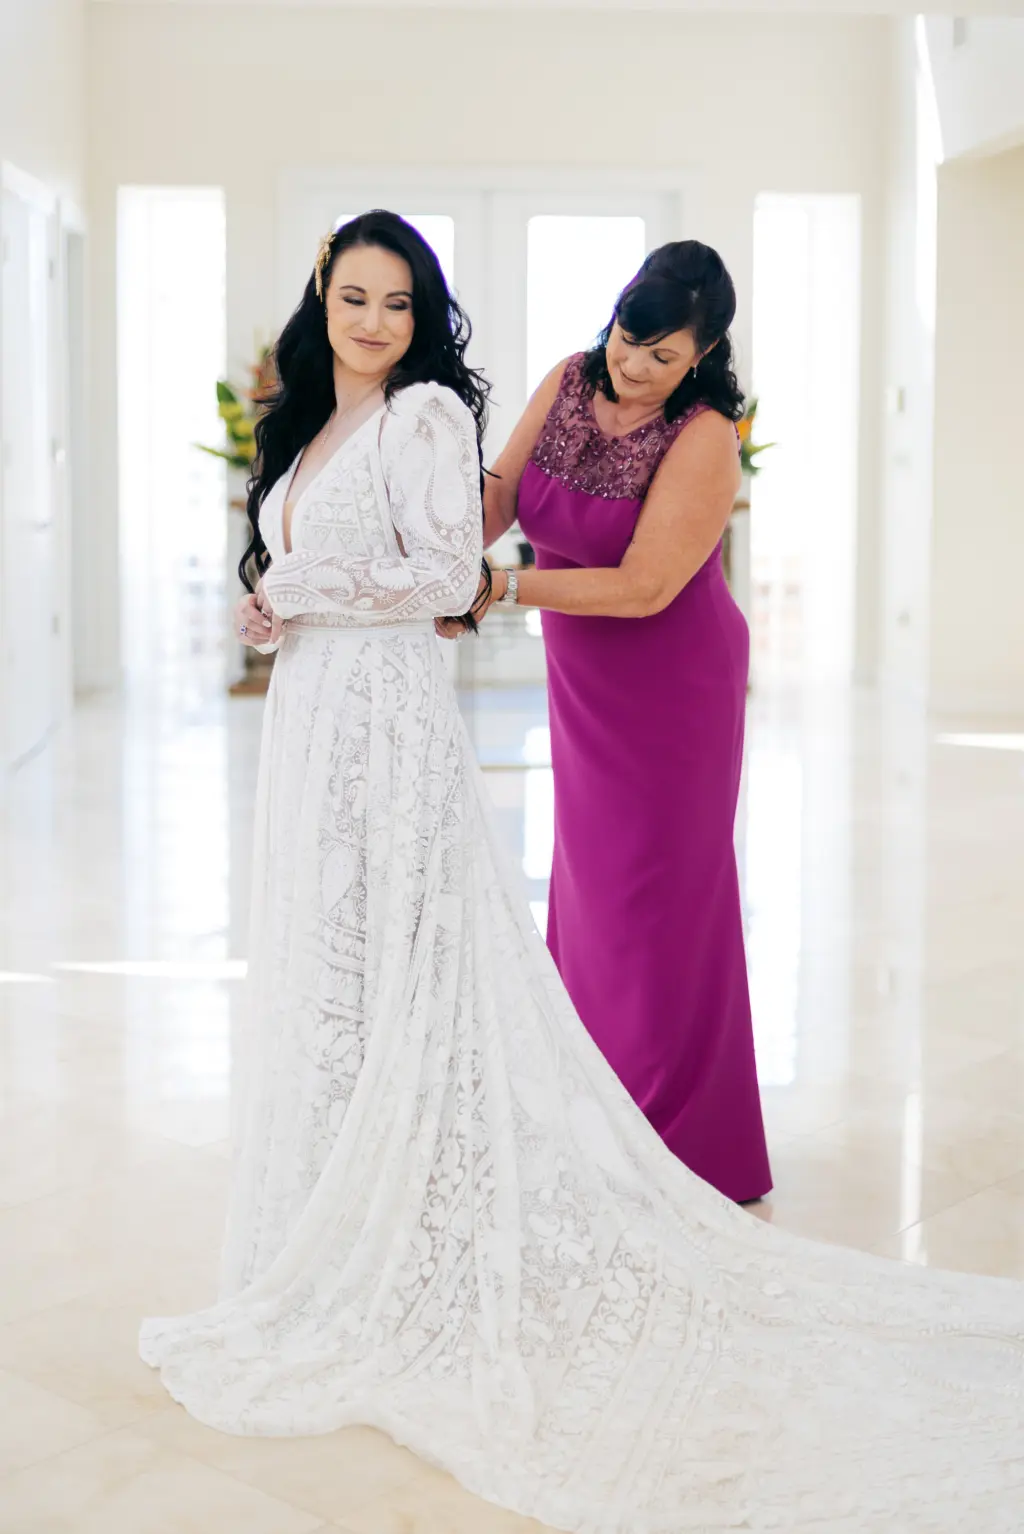 Elegant Bridal Hair and Makeup Inspiration | Bride Getting Ready with Mother | White and Nude Boho Lace Rue de Seine Wedding Dress with Removable Sleeves | Orchid Purple Mother of the Bride Dress Ideas